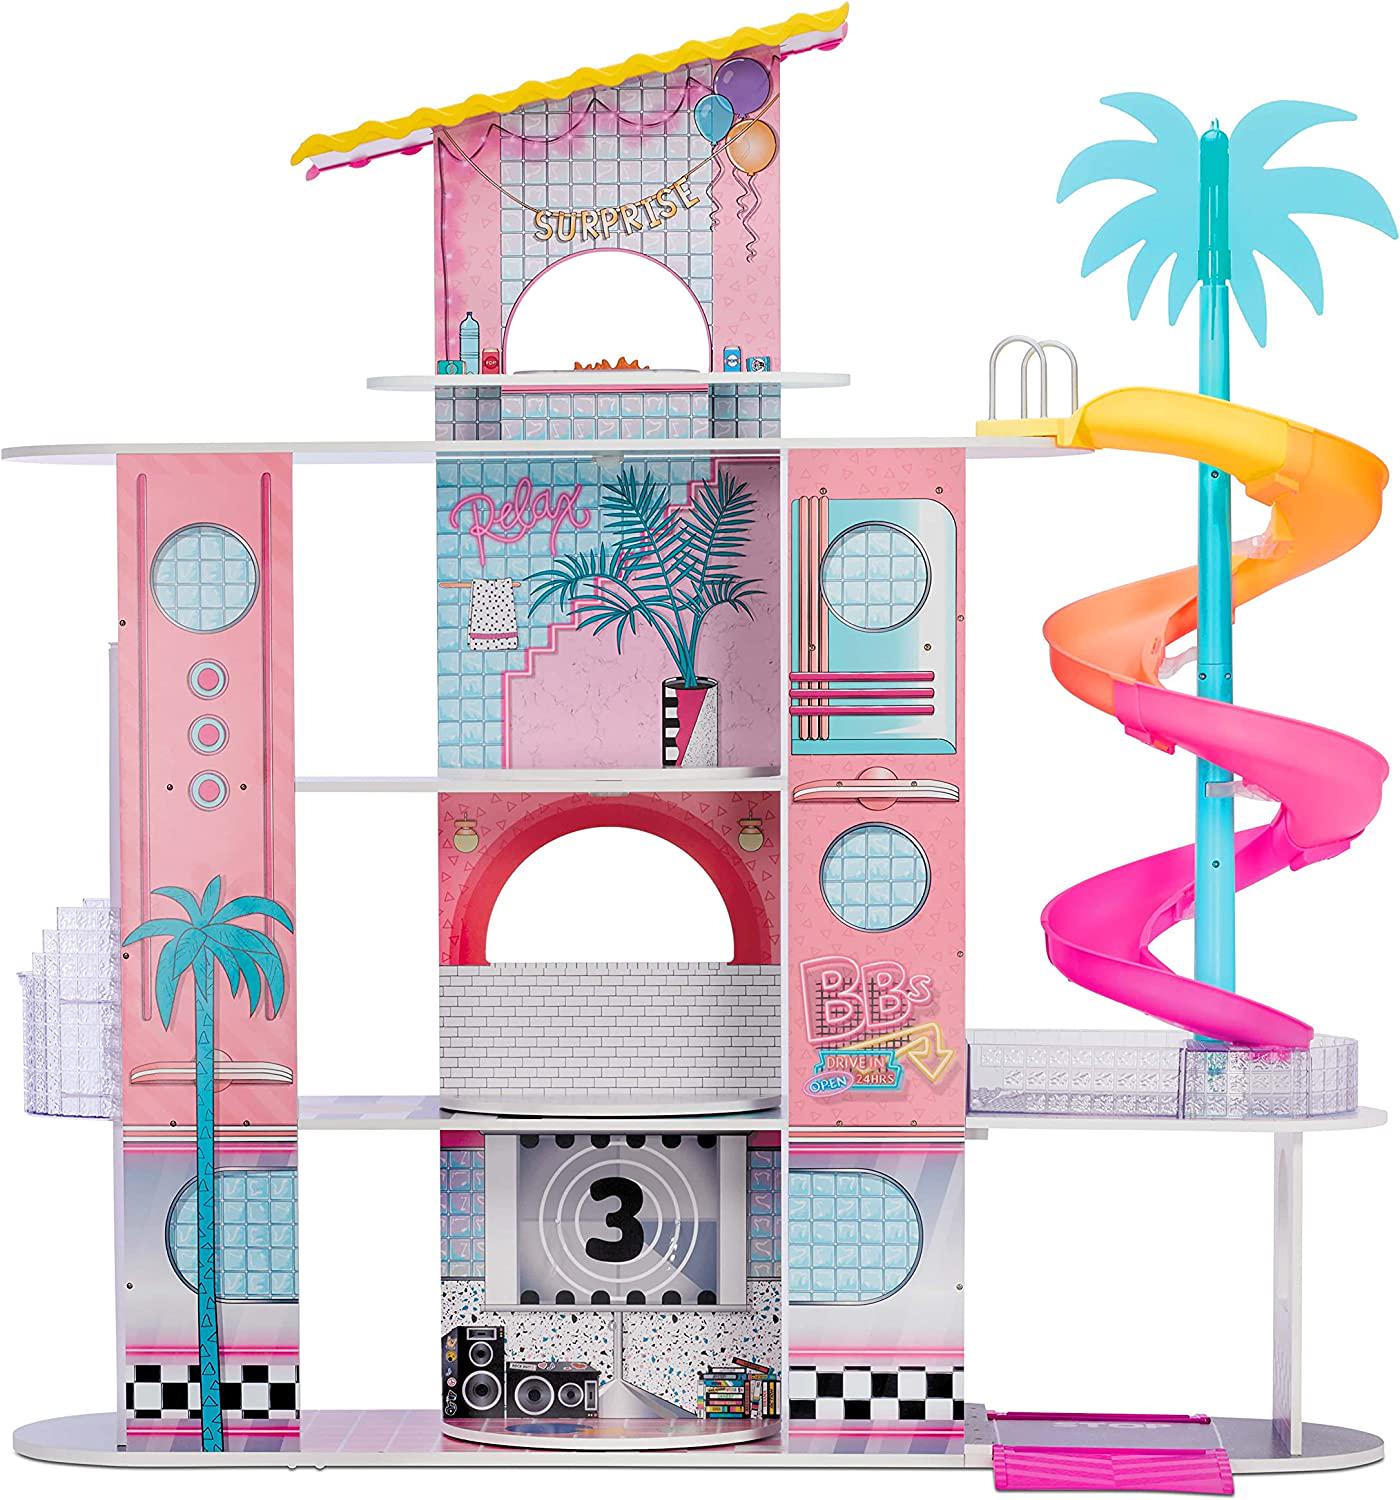 L.O.L. Surprise, LOL Surprise OMG House of Surprises New Real Wood Doll House w 85+ Surprises | 4 Stories, 10 Rooms Including Elevator, Bedroom, Pool, Bathroom, Fully Equipped Kitchen, Living Room, Rooftop and More